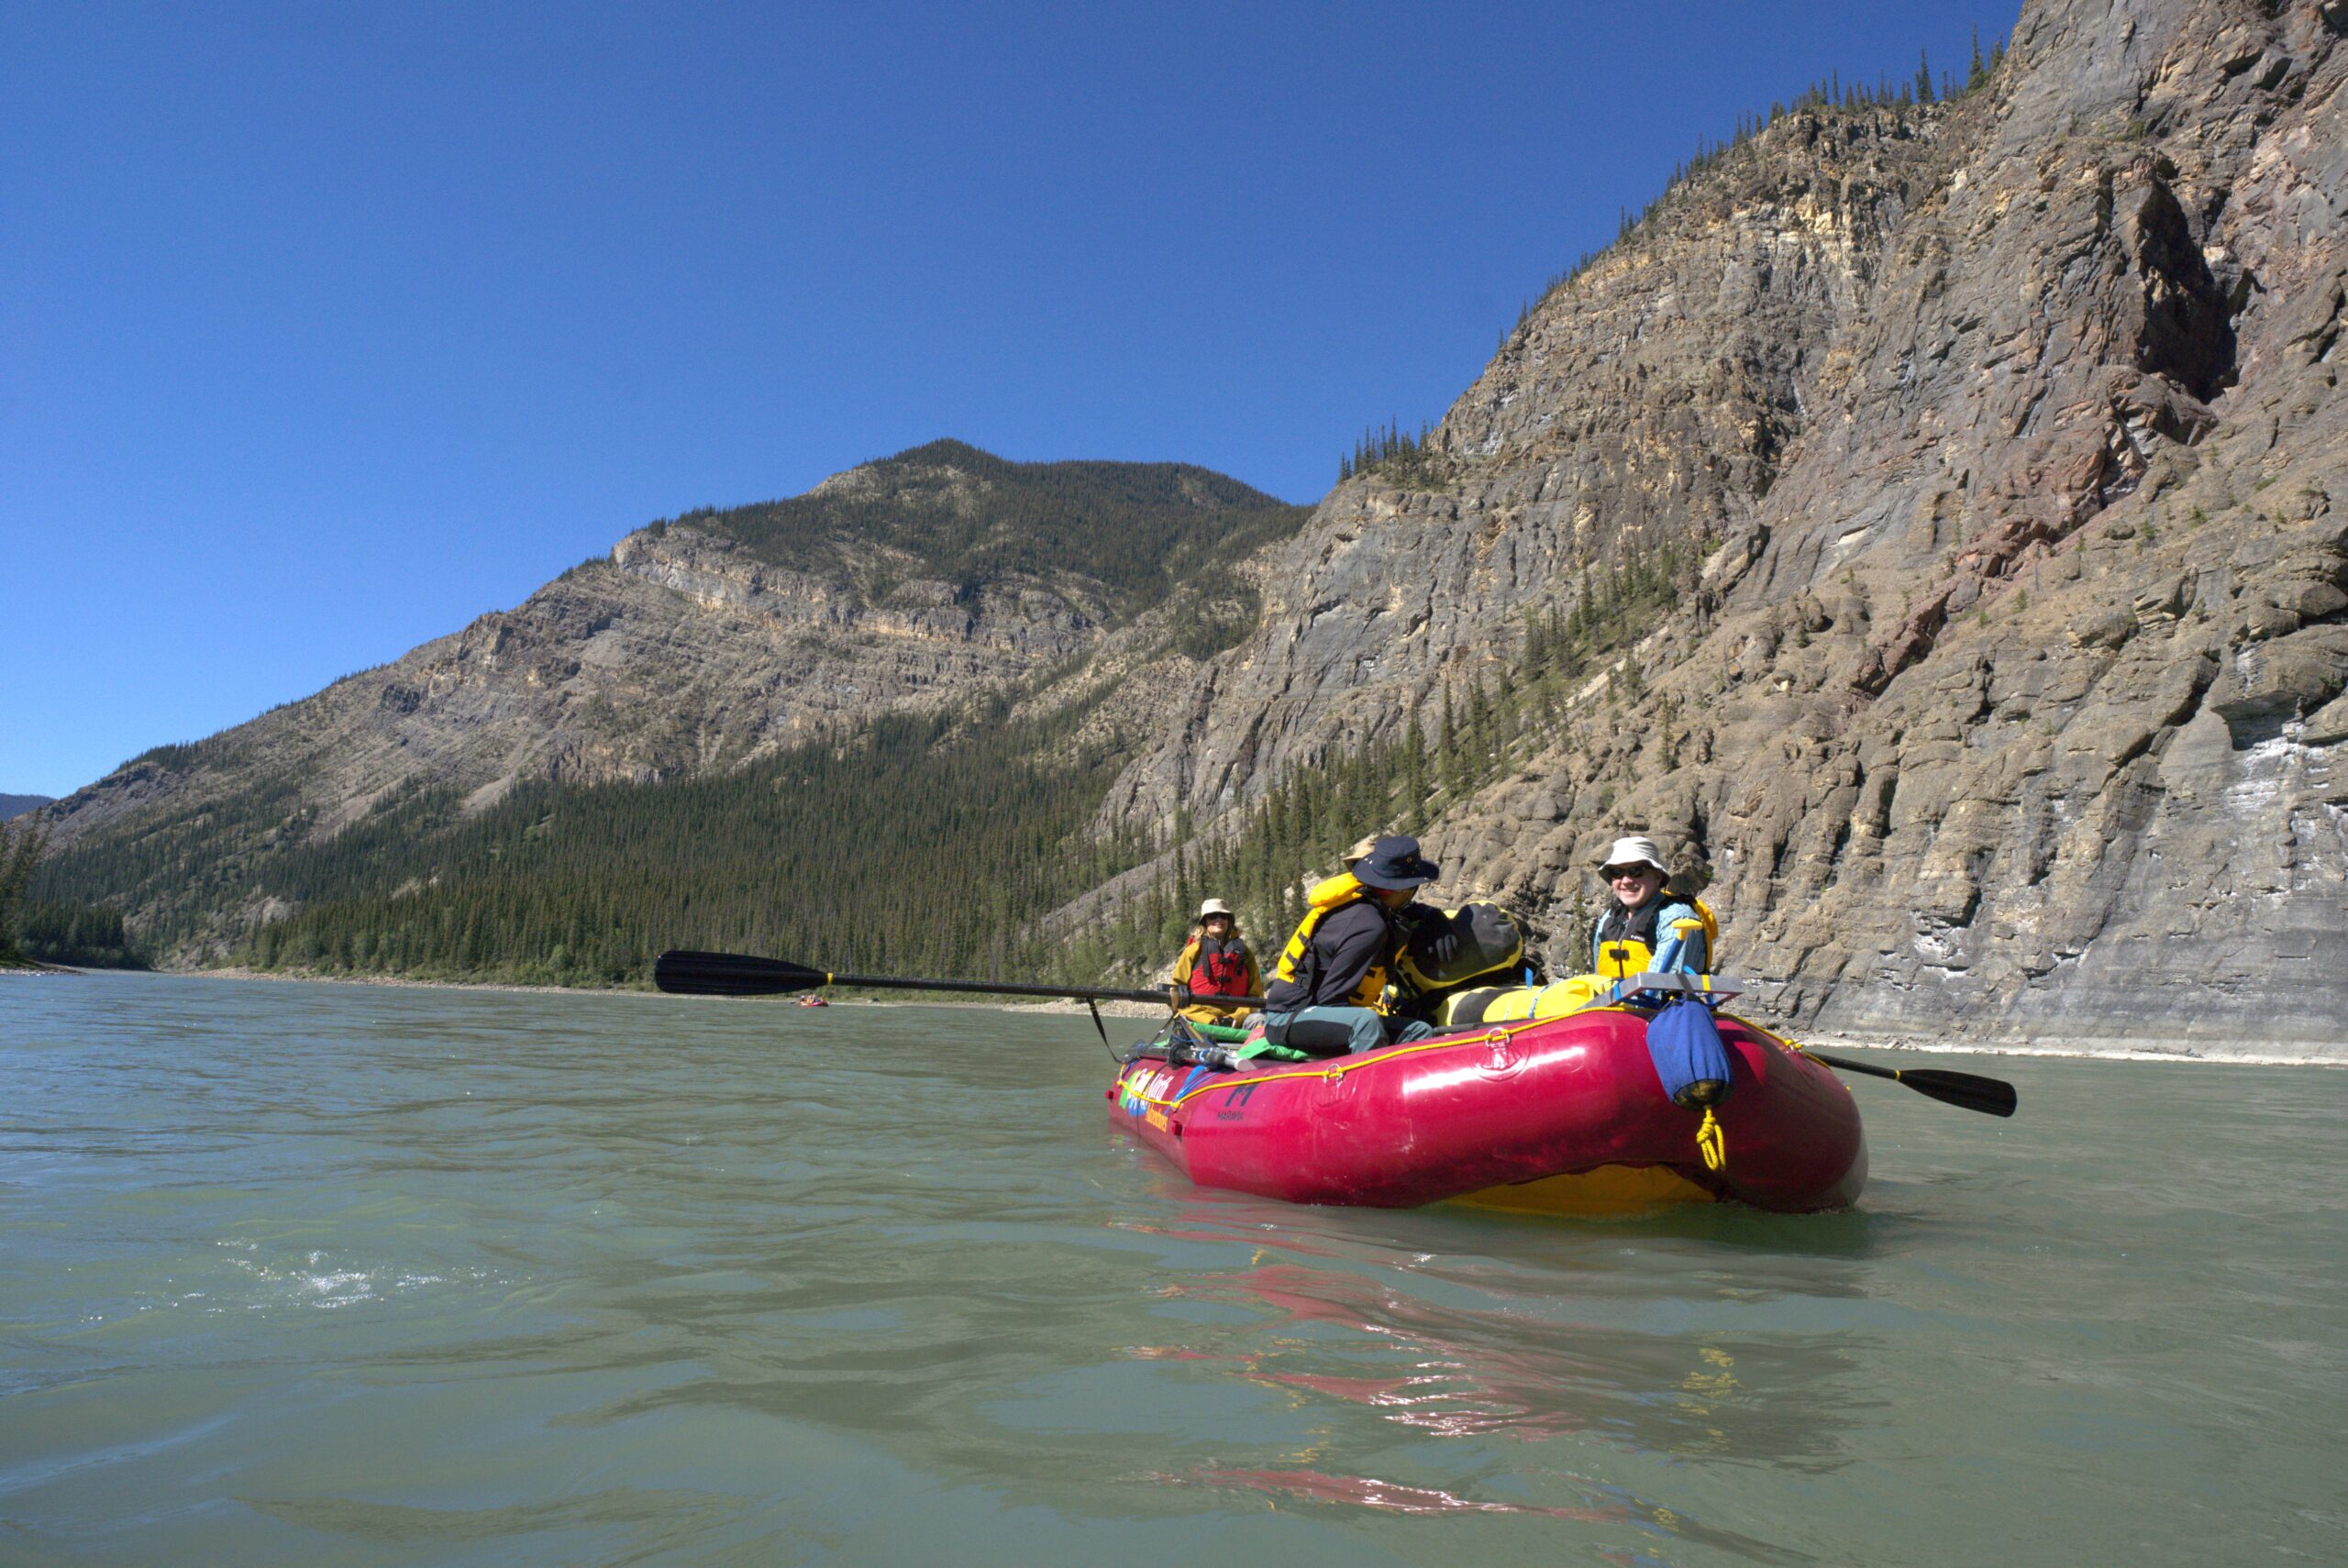 Relaxing on a raft on the Nahanni River